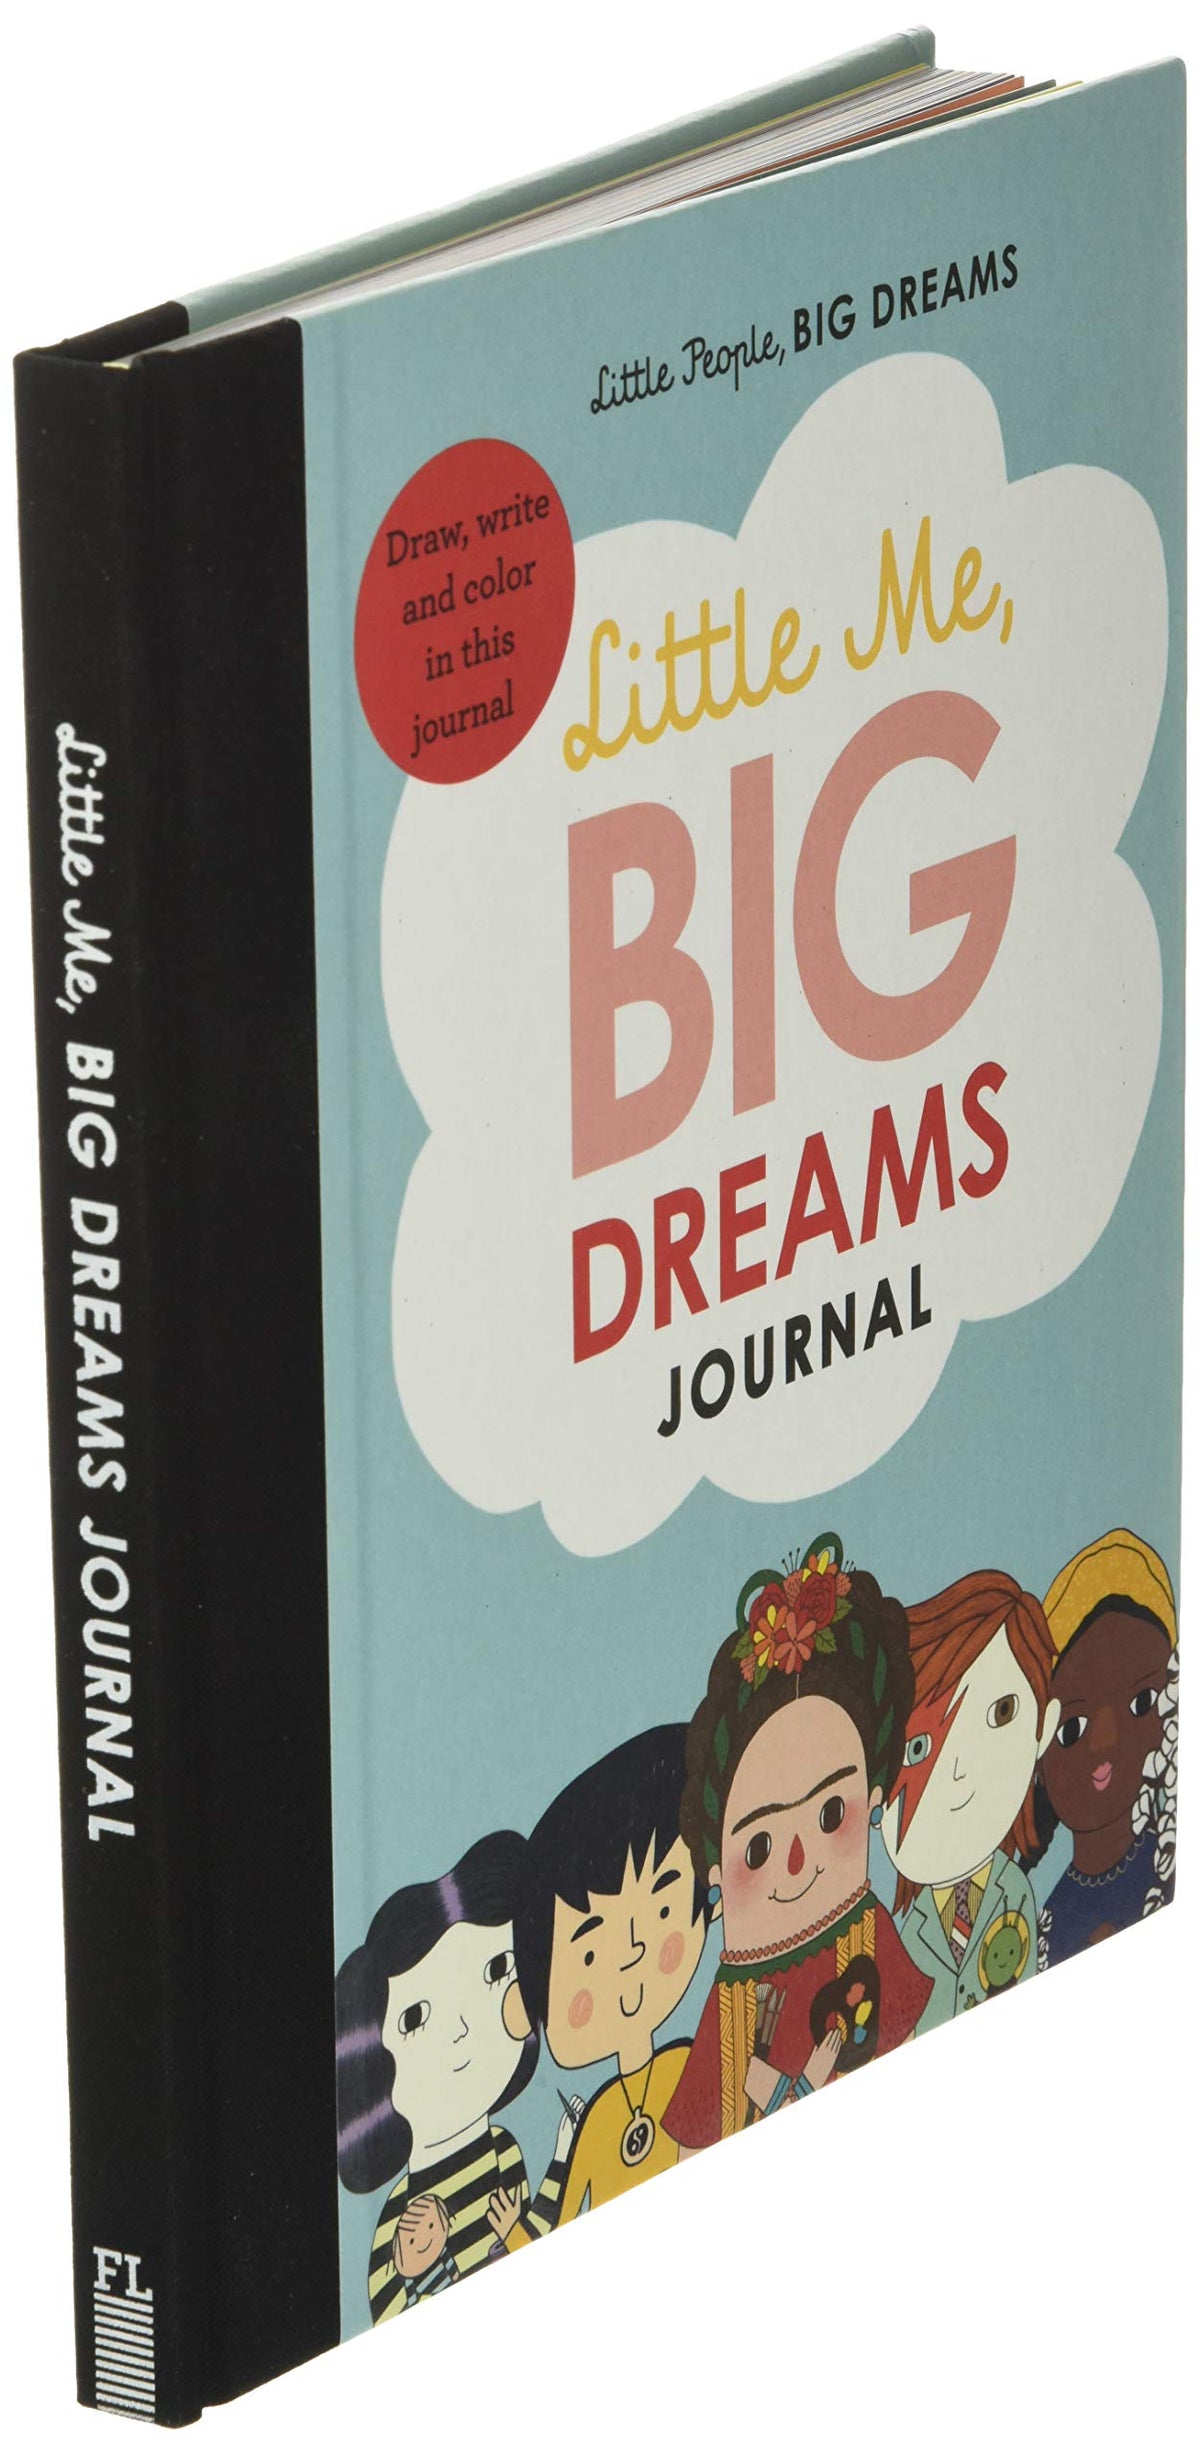 A sky blue background to this book cover with a white cloud above famous illustrated inspirational people like Frida Kahlo. The cloud has the words Little me, Big Dreams written inside. This image shows the books spine with the same words.